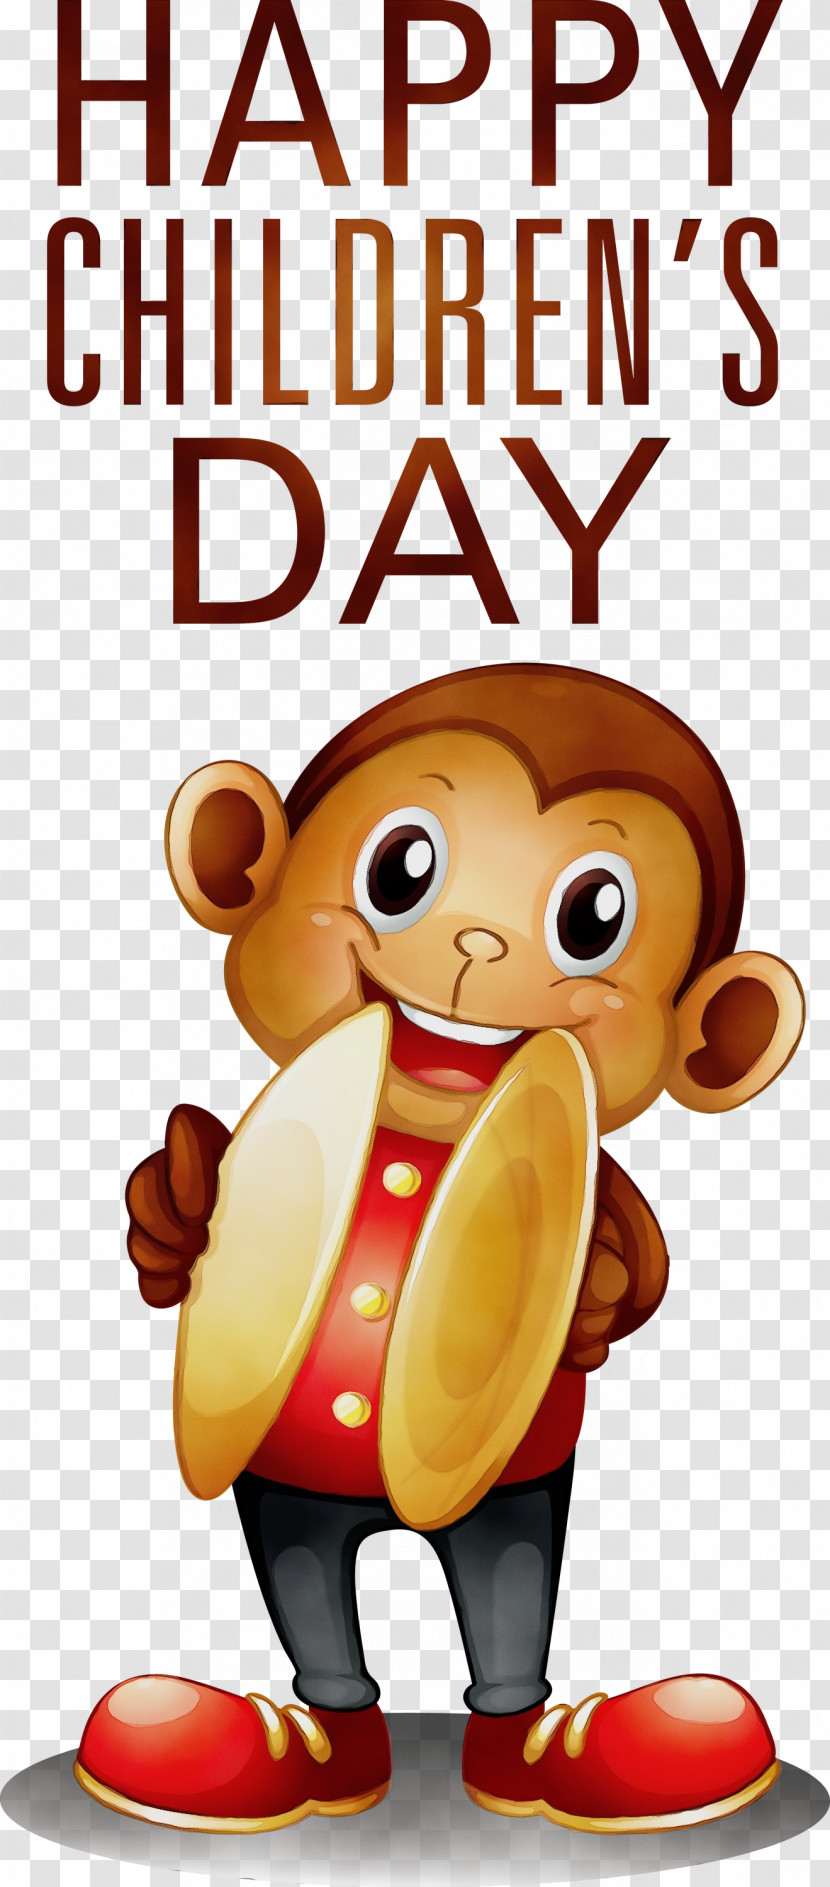 Cymbal Cymbal-banging Monkey Toy Drawing Cartoon Percussion Transparent PNG